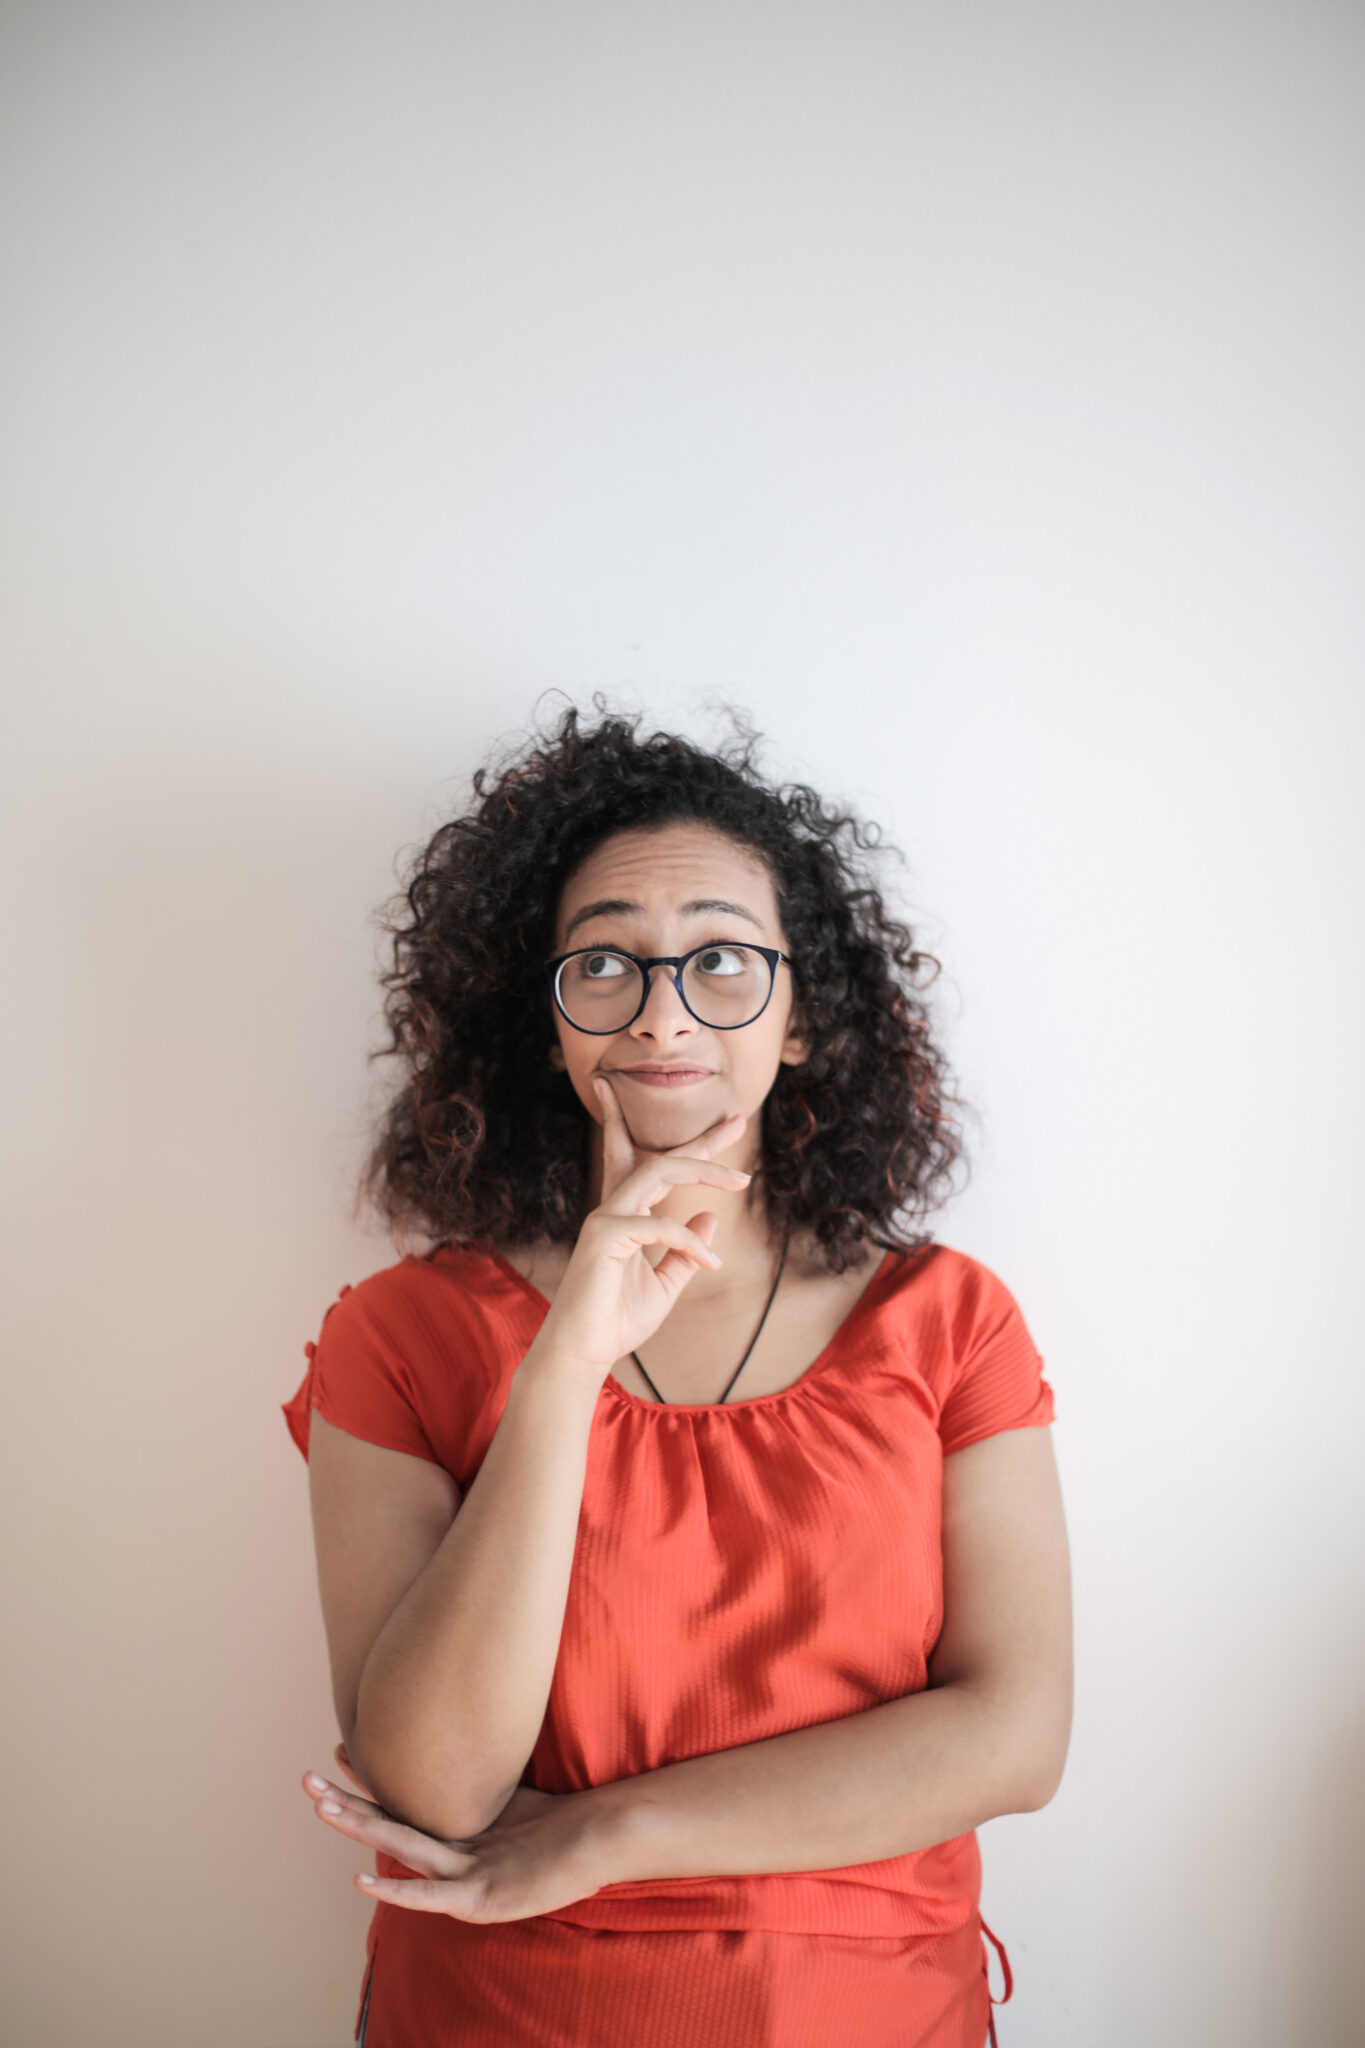 portrait-photo-of-woman-in-red-top-wearing-black-framed-eyeglasses-standing-in-front-of-white-background-thinking-stockpack-pexels